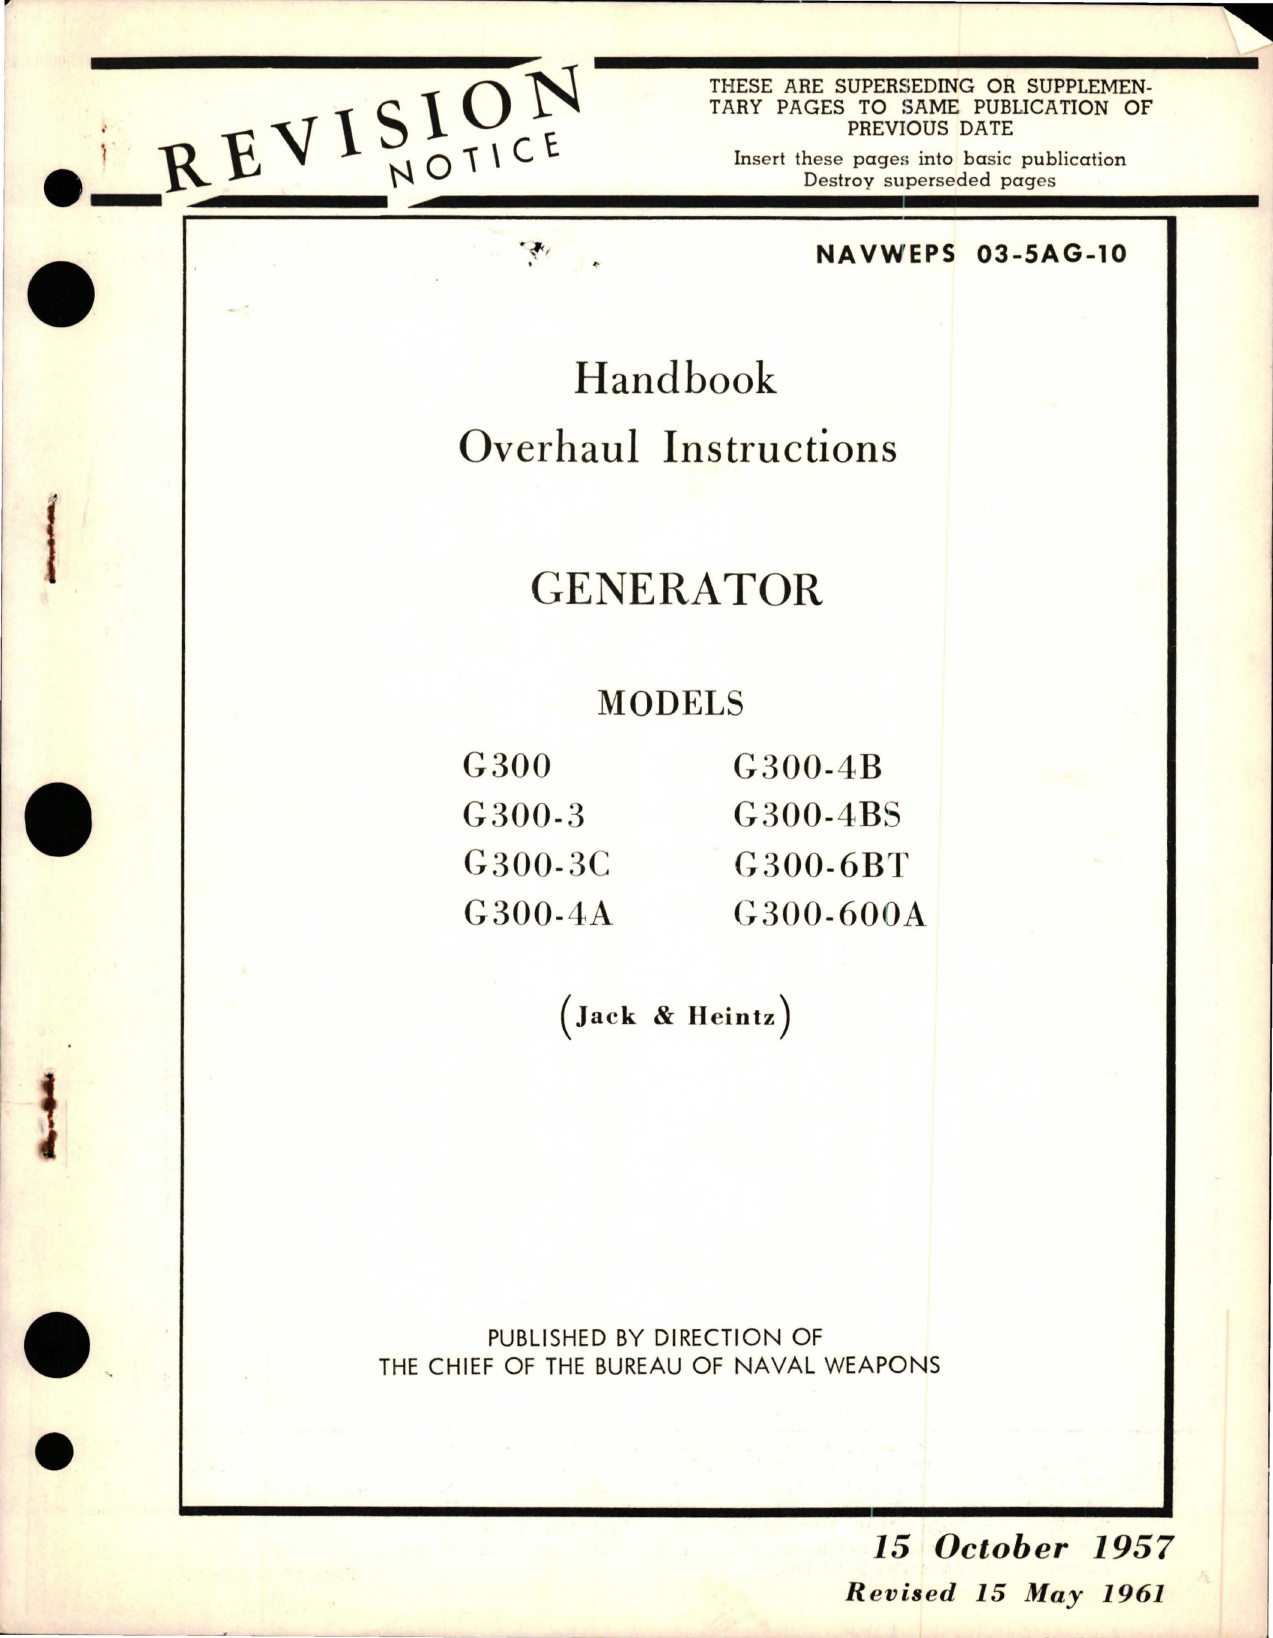 Sample page 1 from AirCorps Library document: Overhaul Instructions for Generator - Models G300, G300-3, G300-3C, G300-4A, G300-4B, G300-4BS, G300-6BT, and G300-600A